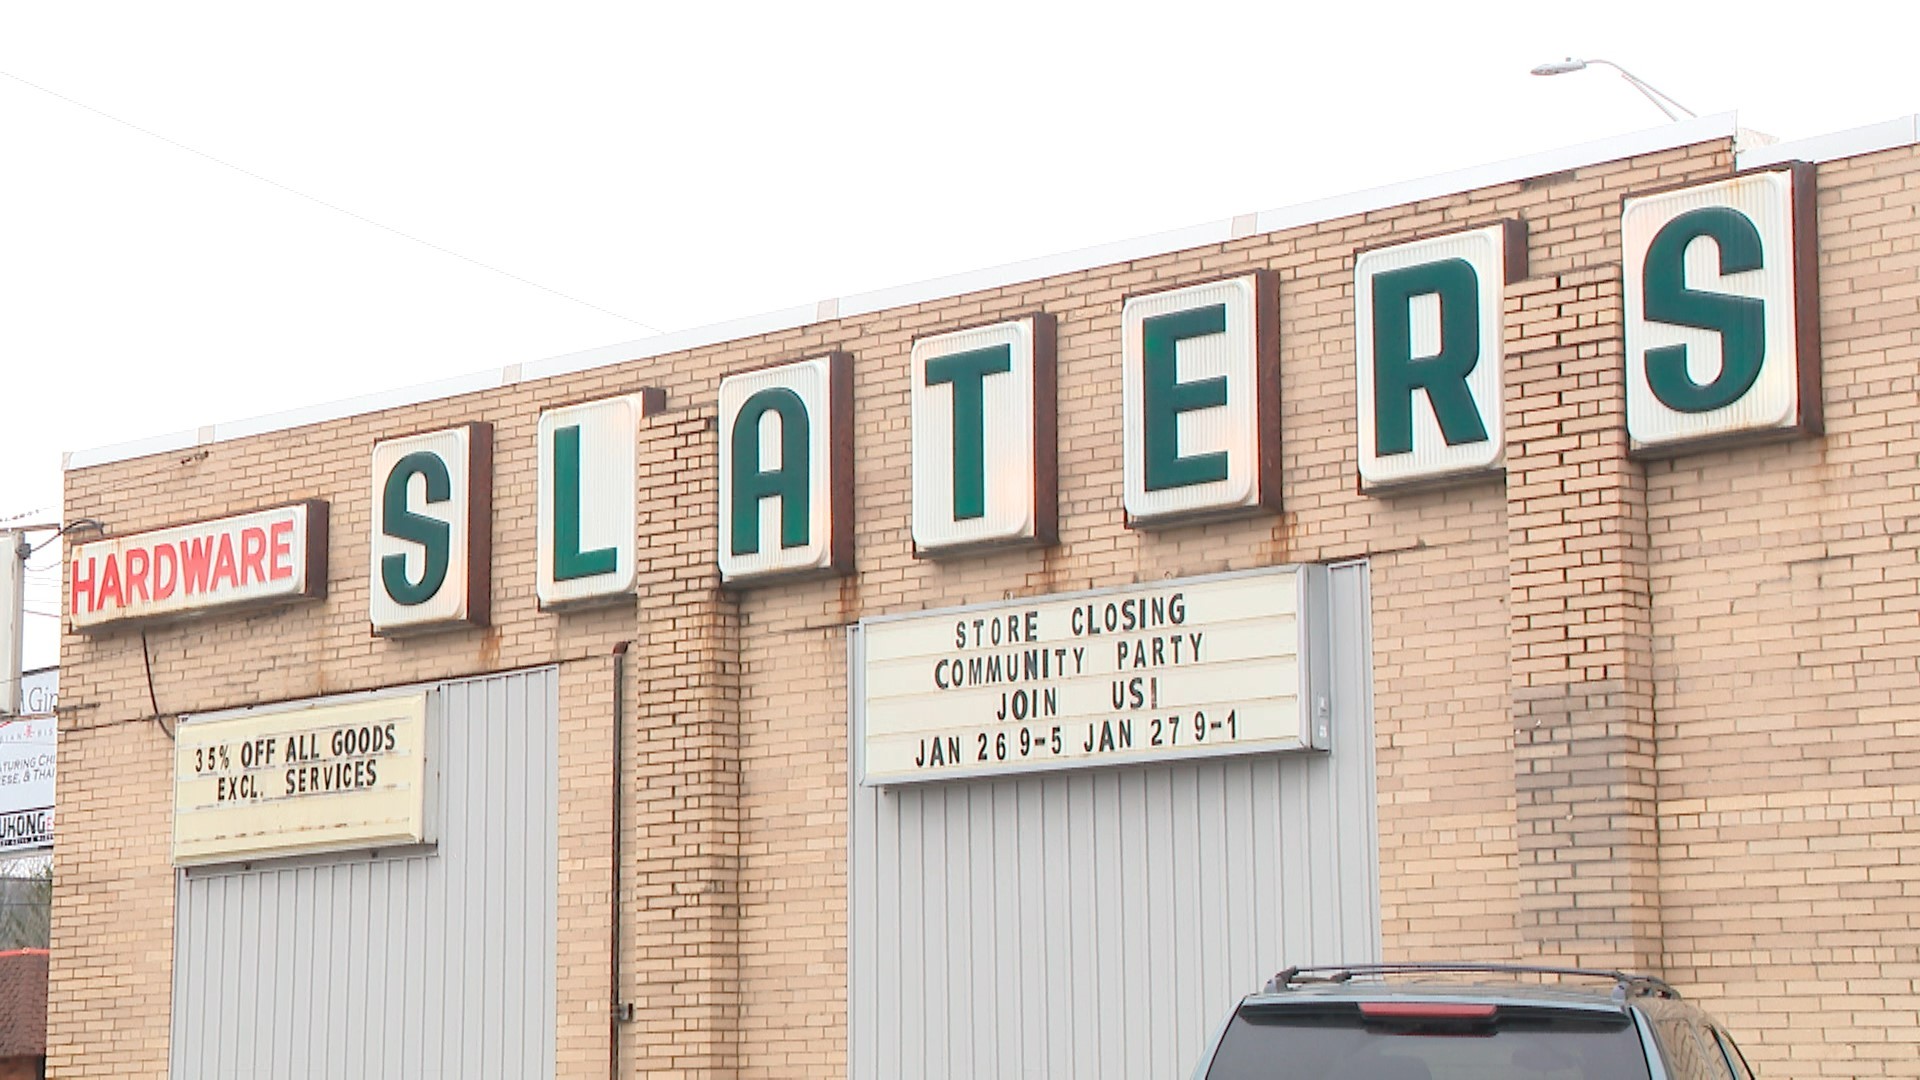 Slater's Hardware, located in Lancaster, is preparing to close its doors for good after 78 years in business.